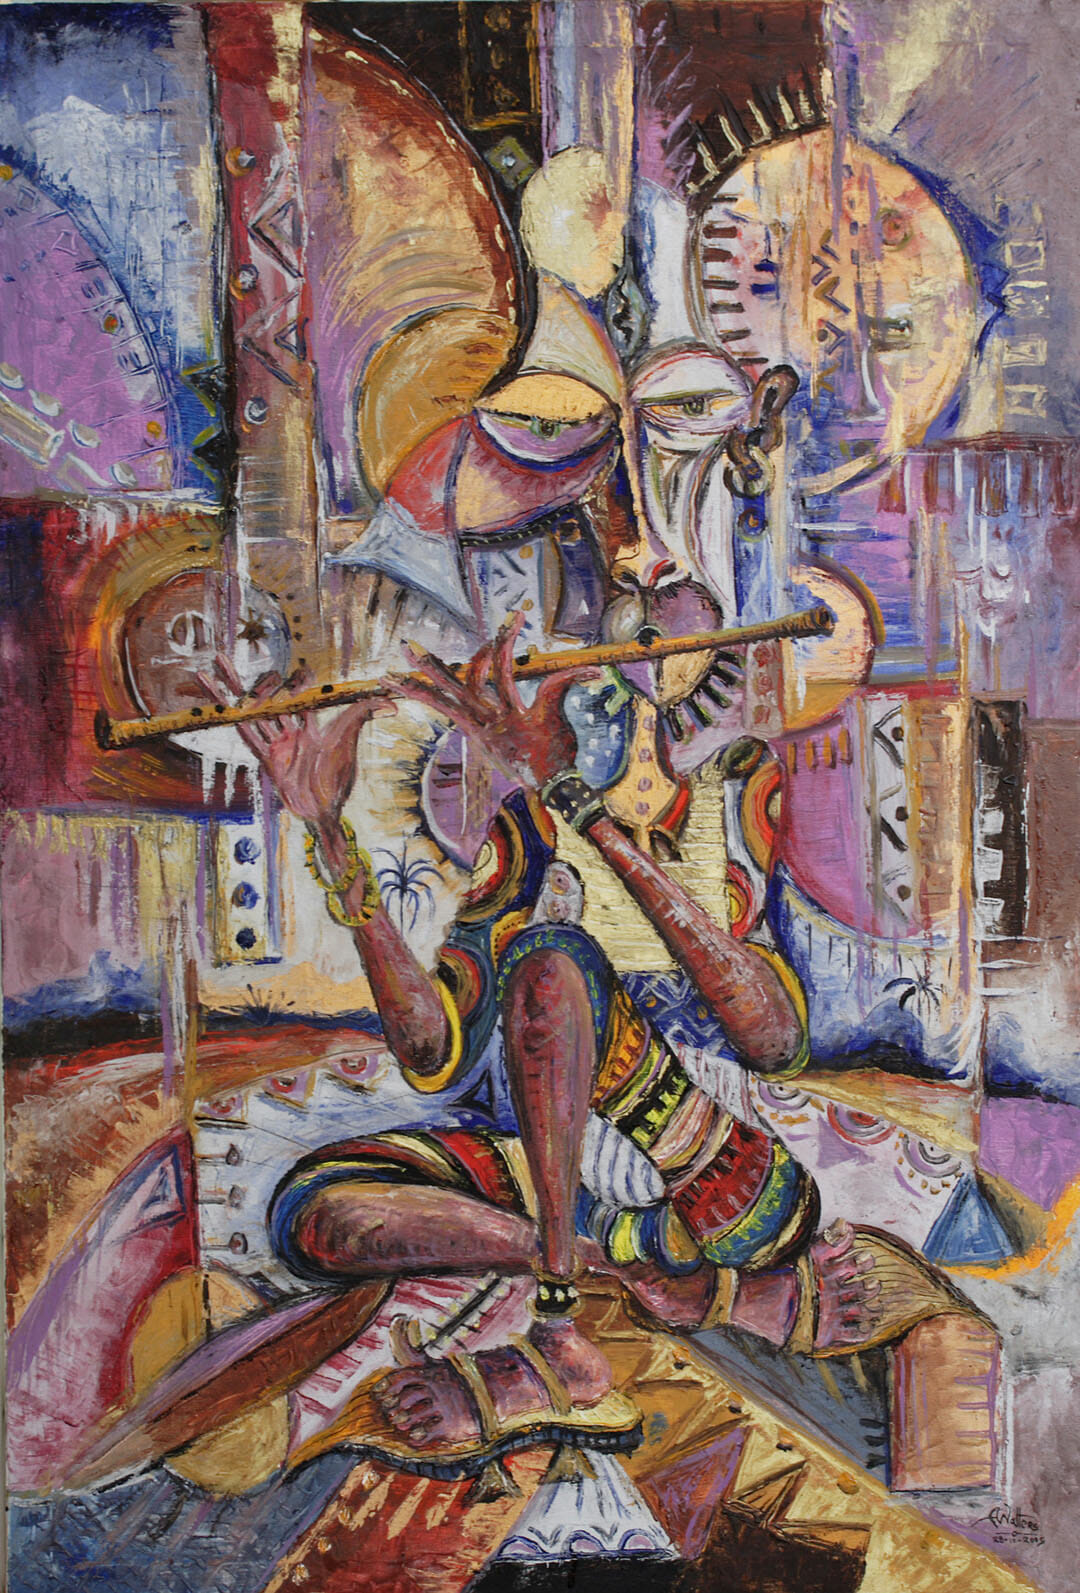 The Flutist 9 surreal African art painting